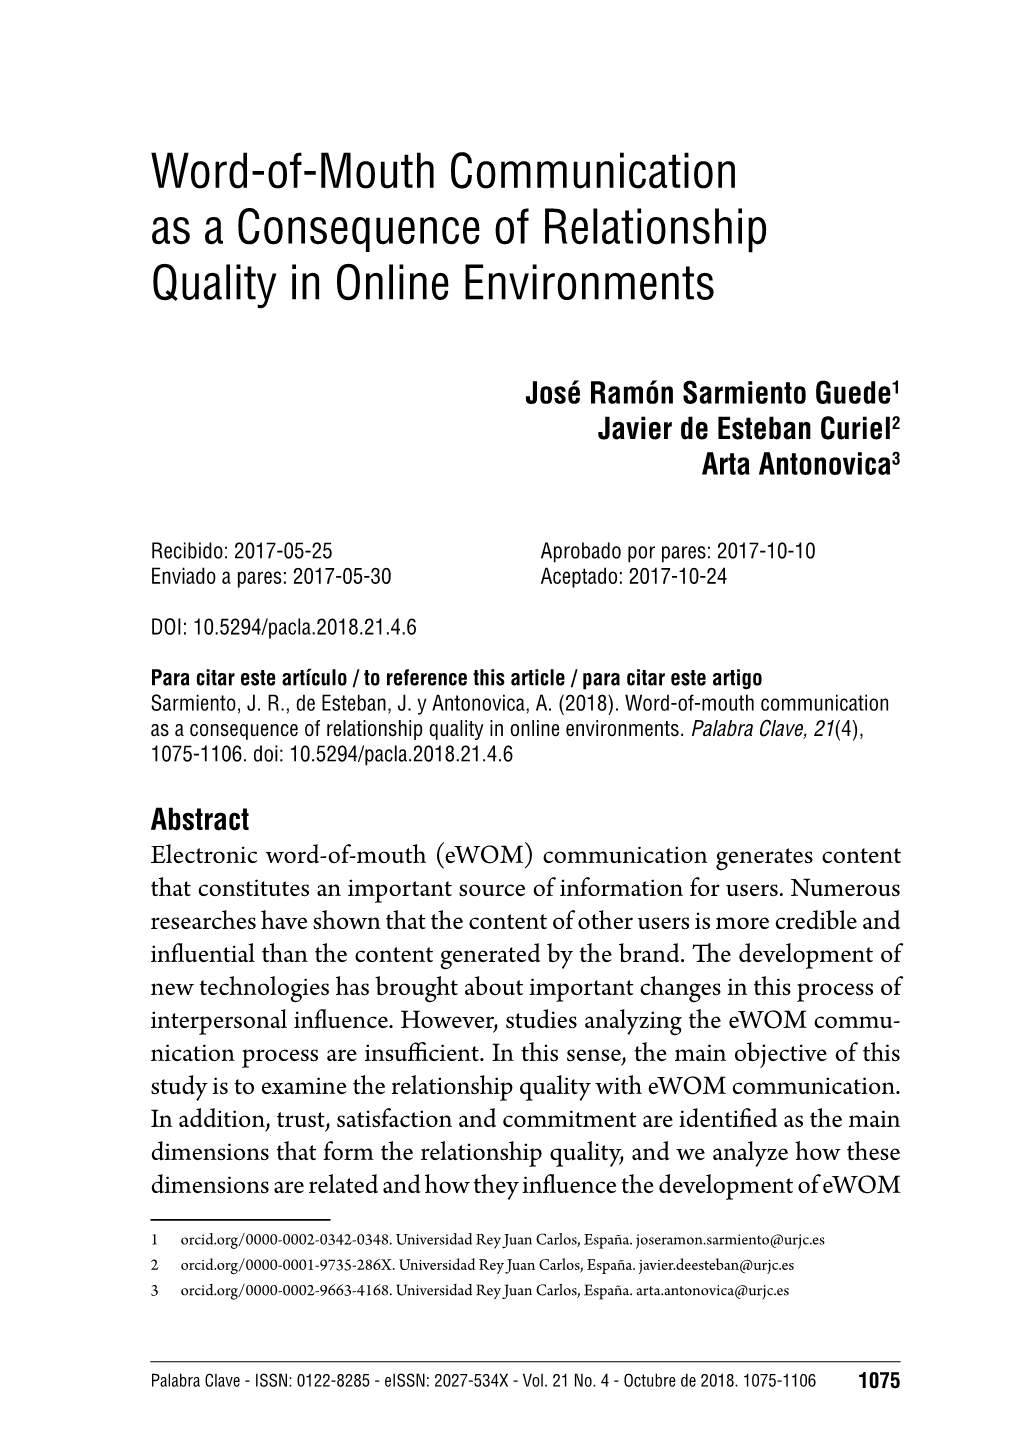 Word-Of-Mouth Communication As a Consequence of Relationship Quality in Online Environments